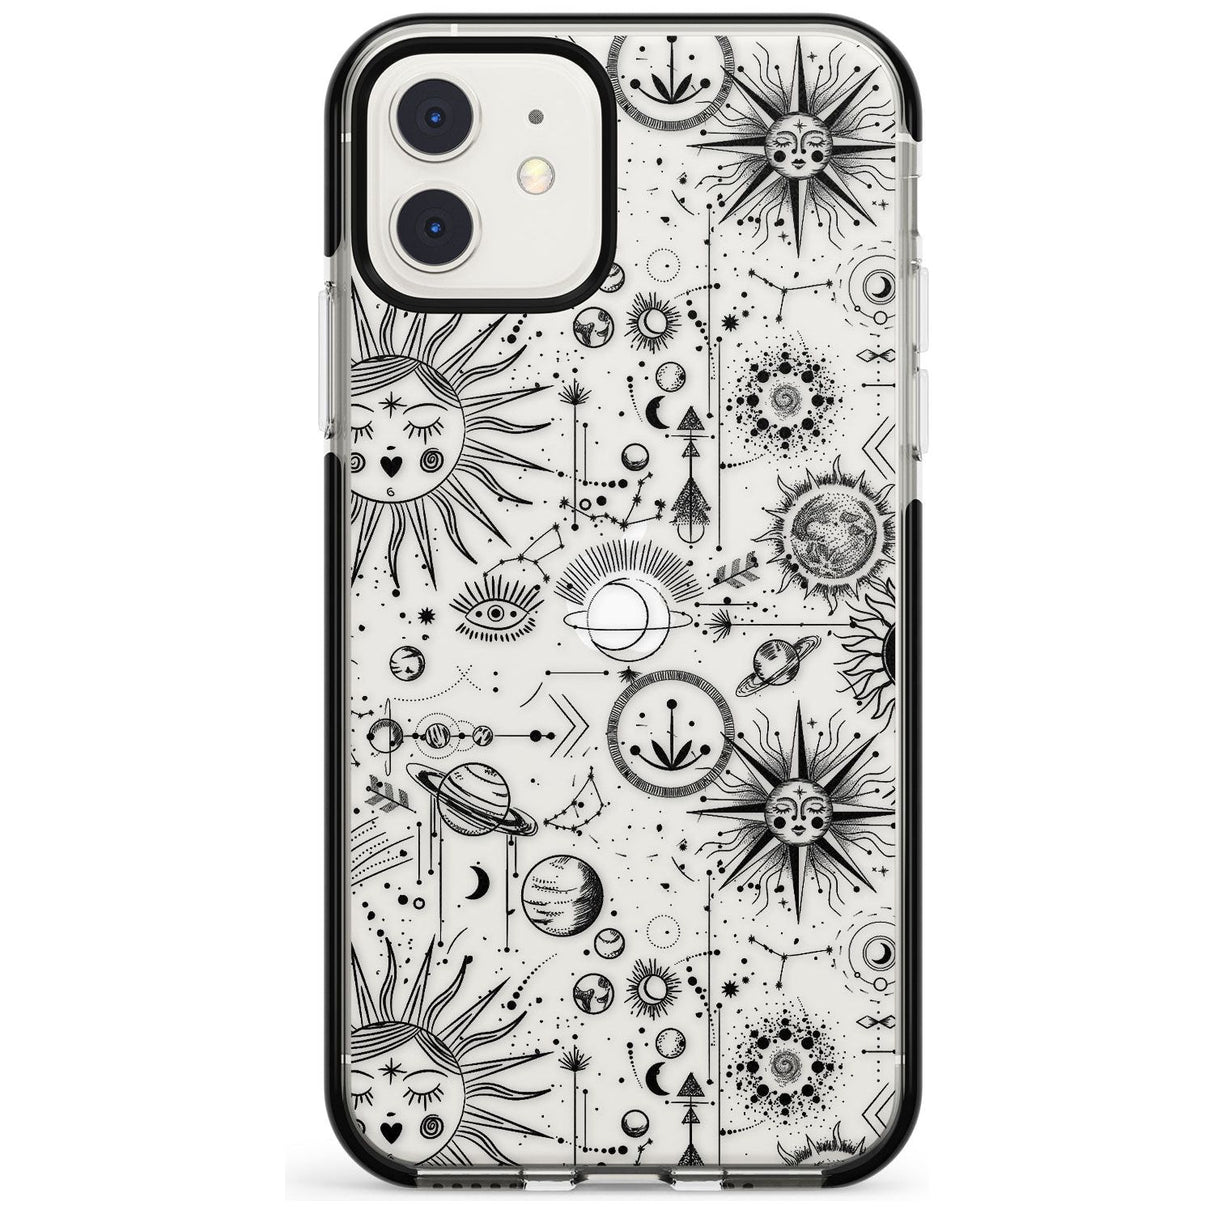 Suns & Planets Vintage Astrological Black Impact Phone Case for iPhone 11